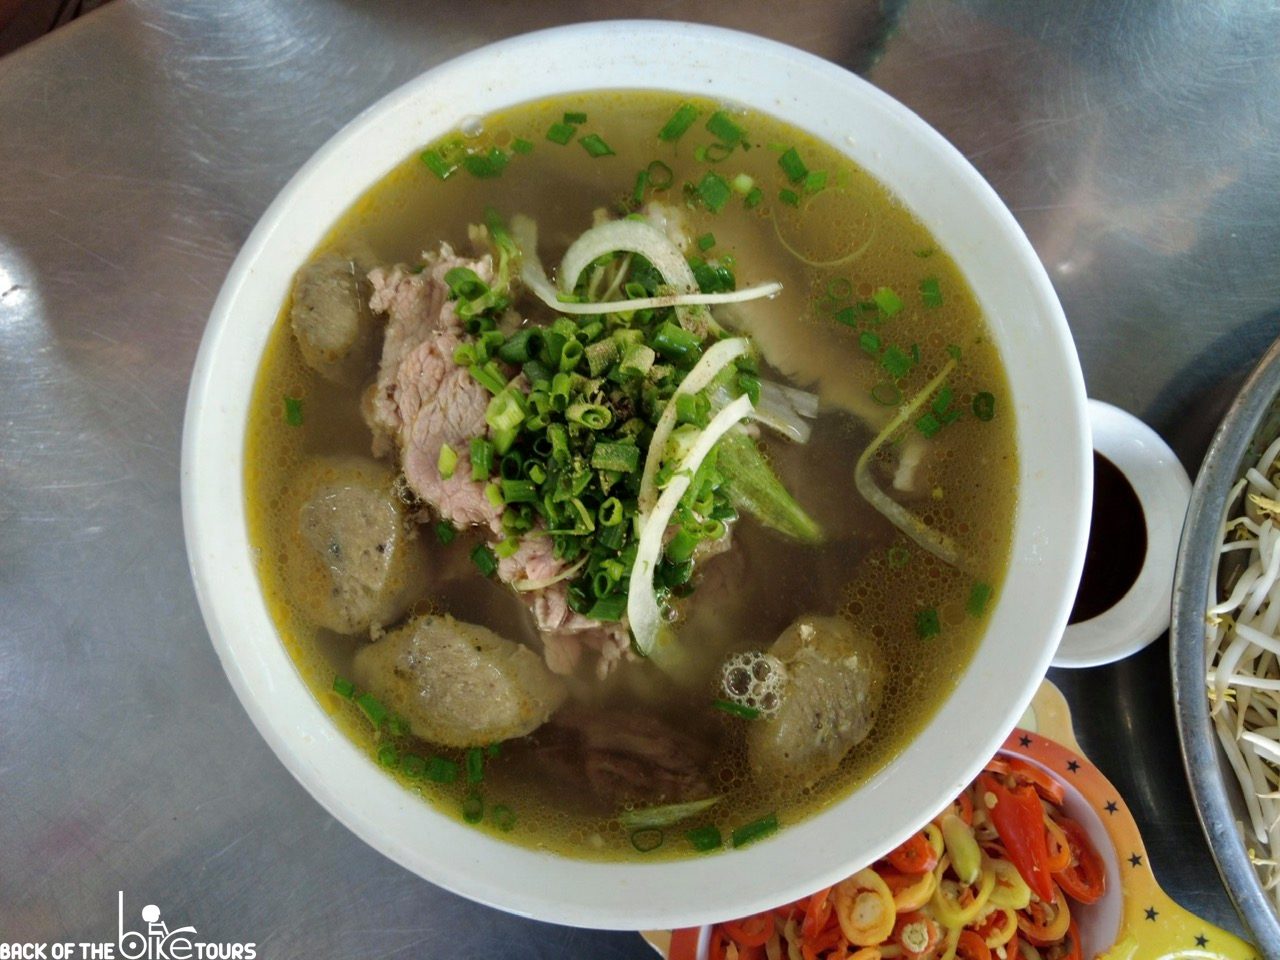 How much does pho cost in vietnam?